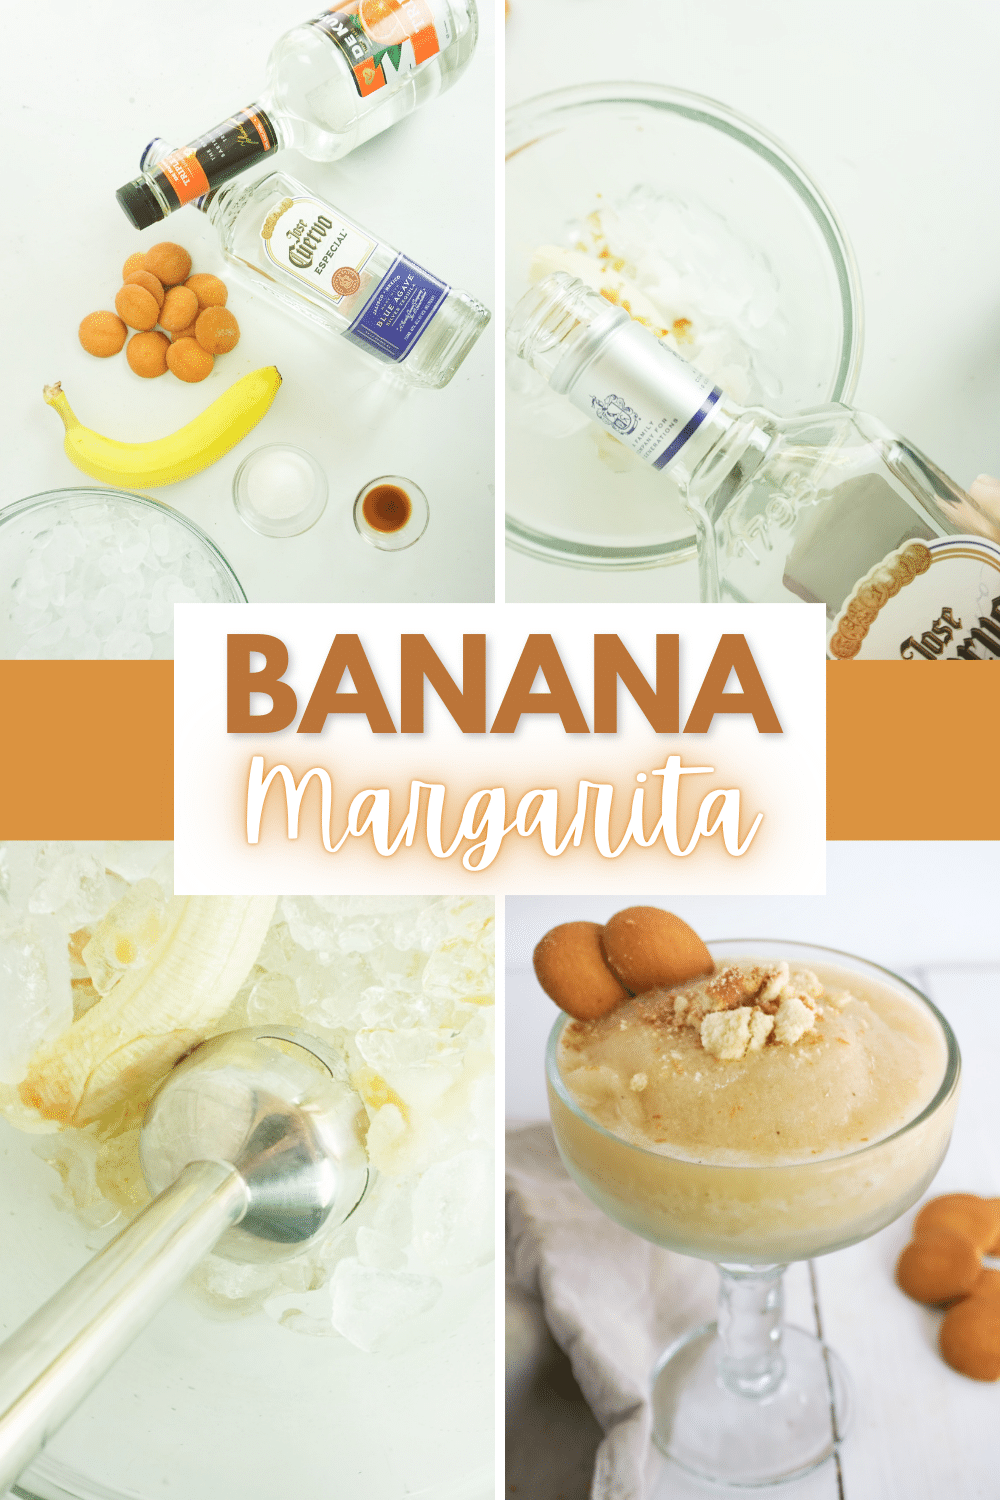 This Banana Margarita is a great way to liven up any Cinco De Mayo gathering or just to enjoy on a hot day. Banana with tequila is delicious! #bananamargarita #bananarita #margaritas #bananas #cocktail via @wondermomwannab